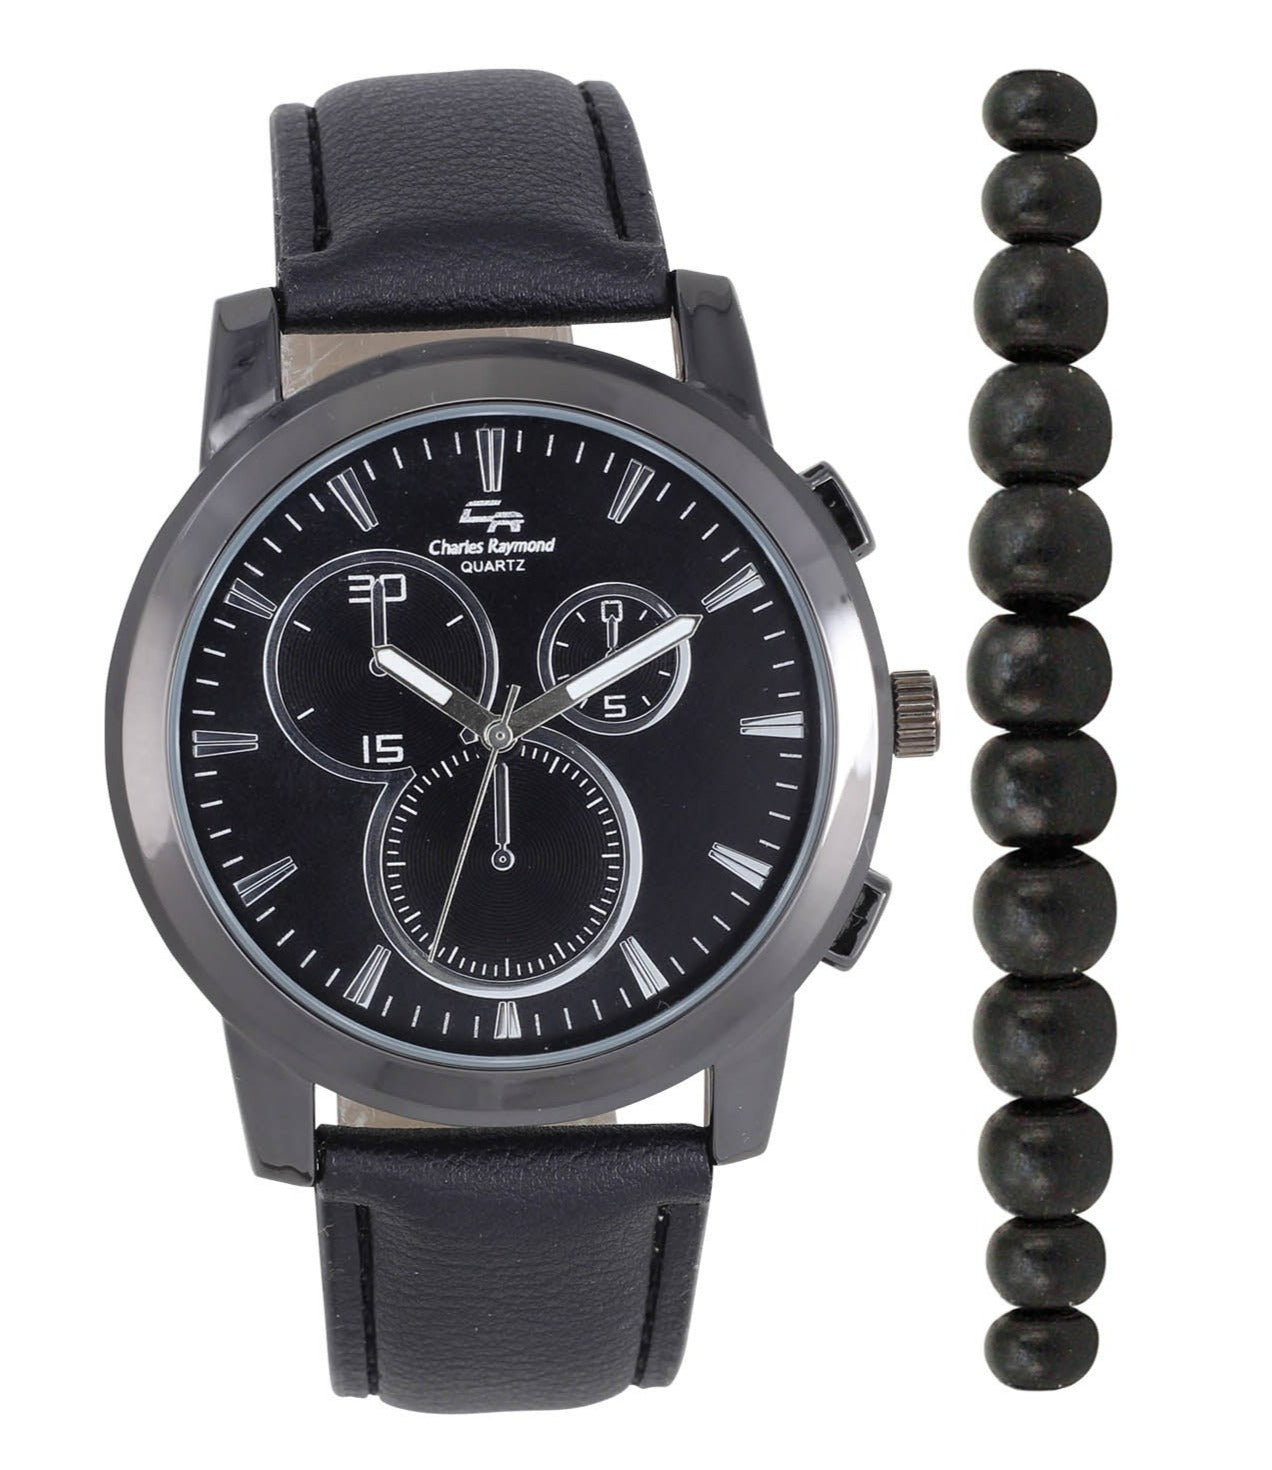 ST10548 Classic Leather Band Watch with Beaded Bracelet